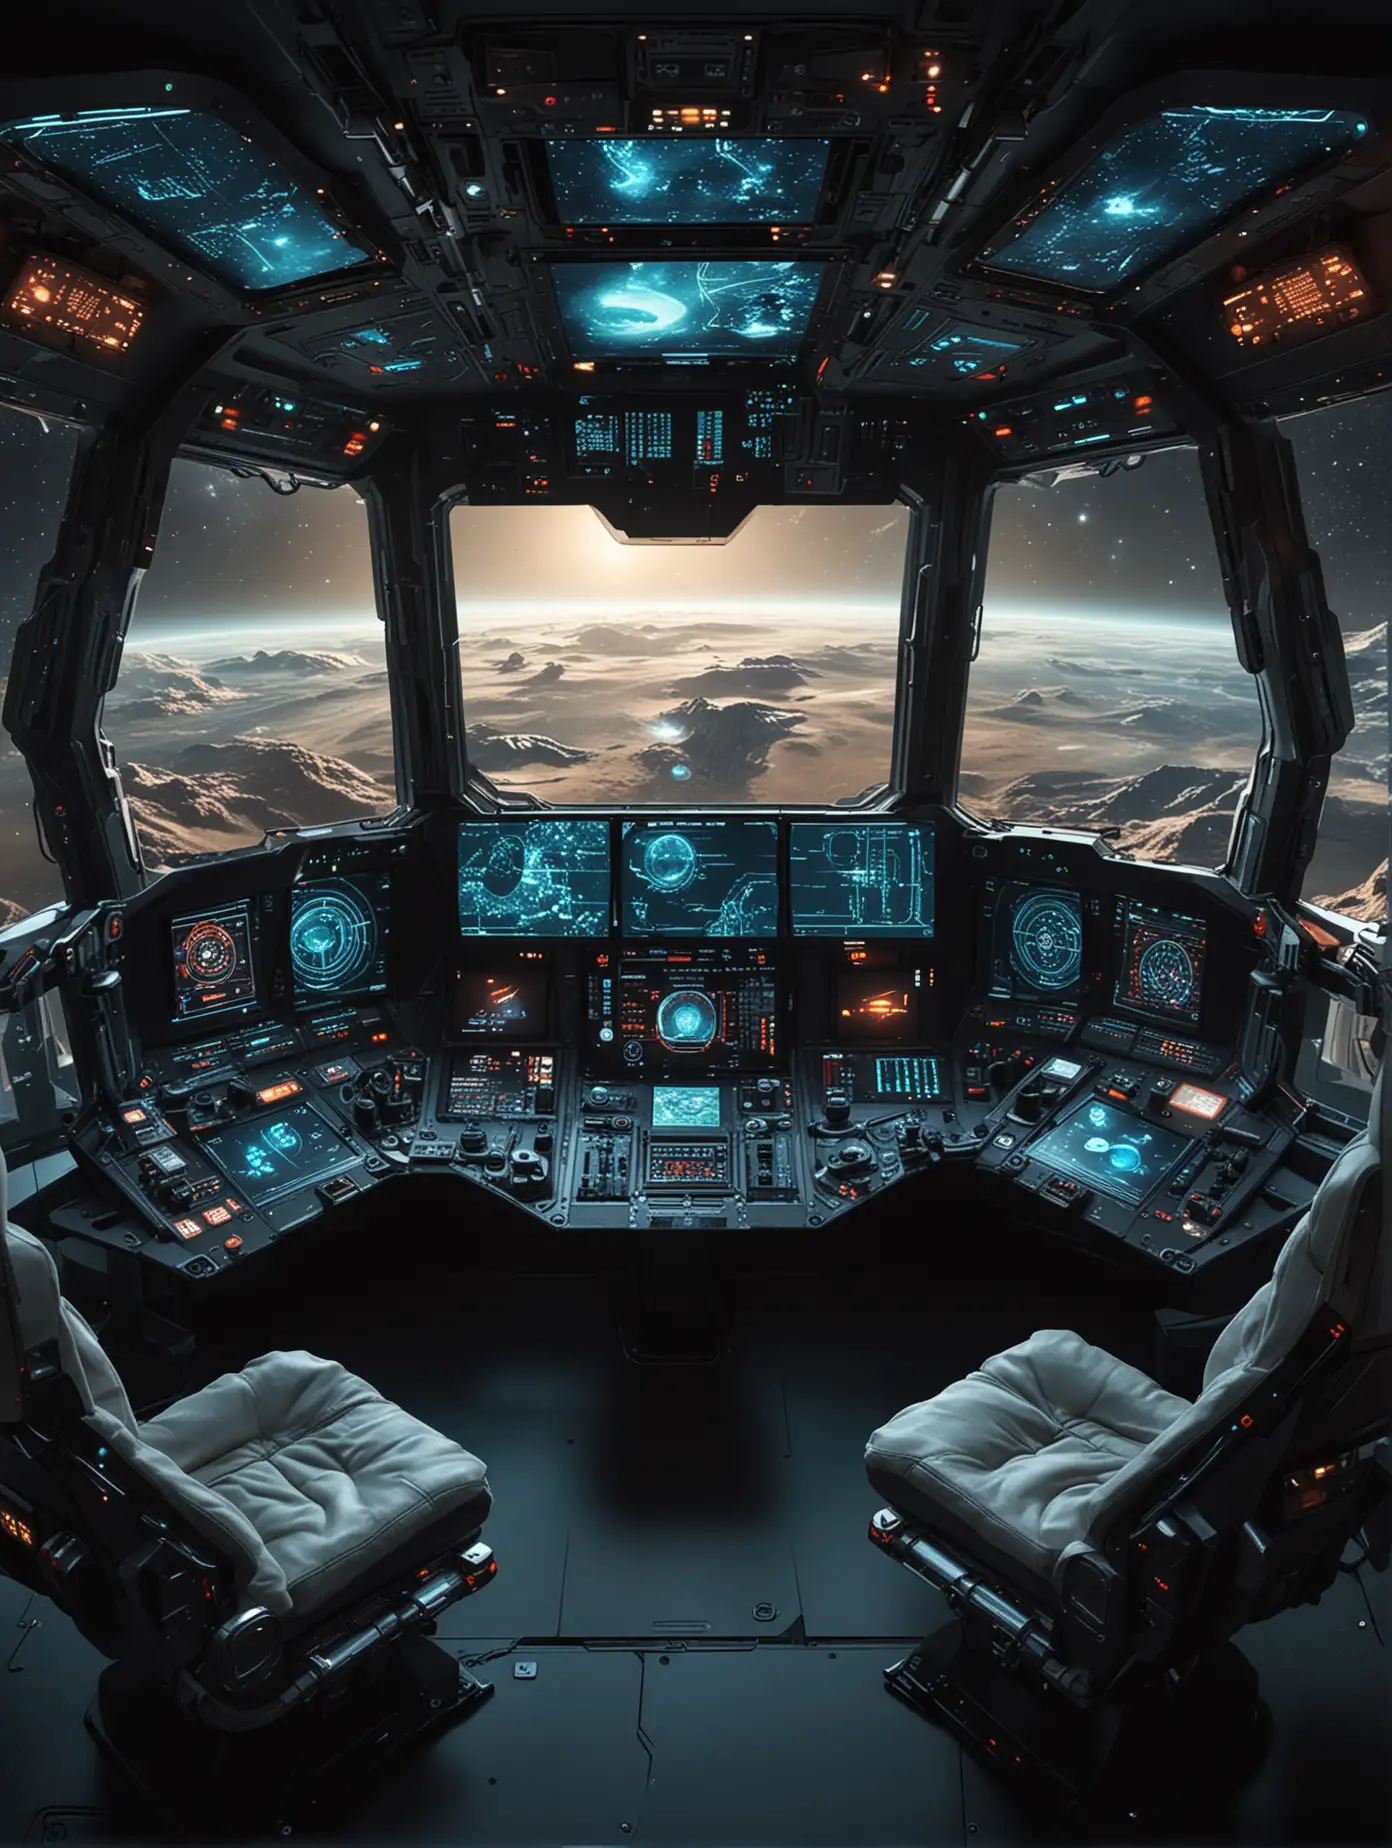 A futuristic spaceship cockpit with a large command center and multiple seats. The cockpit is spacious and high-tech, featuring a central command table surrounded by ergonomic crew seats. The large window provides an expansive view of outer space, showcasing stars, nebulae, and distant planets. Advanced holographic displays and controls are integrated into the command table, providing real-time data, navigation information, and interactive controls. The overall design is sleek, modern, and sophisticated, with a strong sci-fi aesthetic.